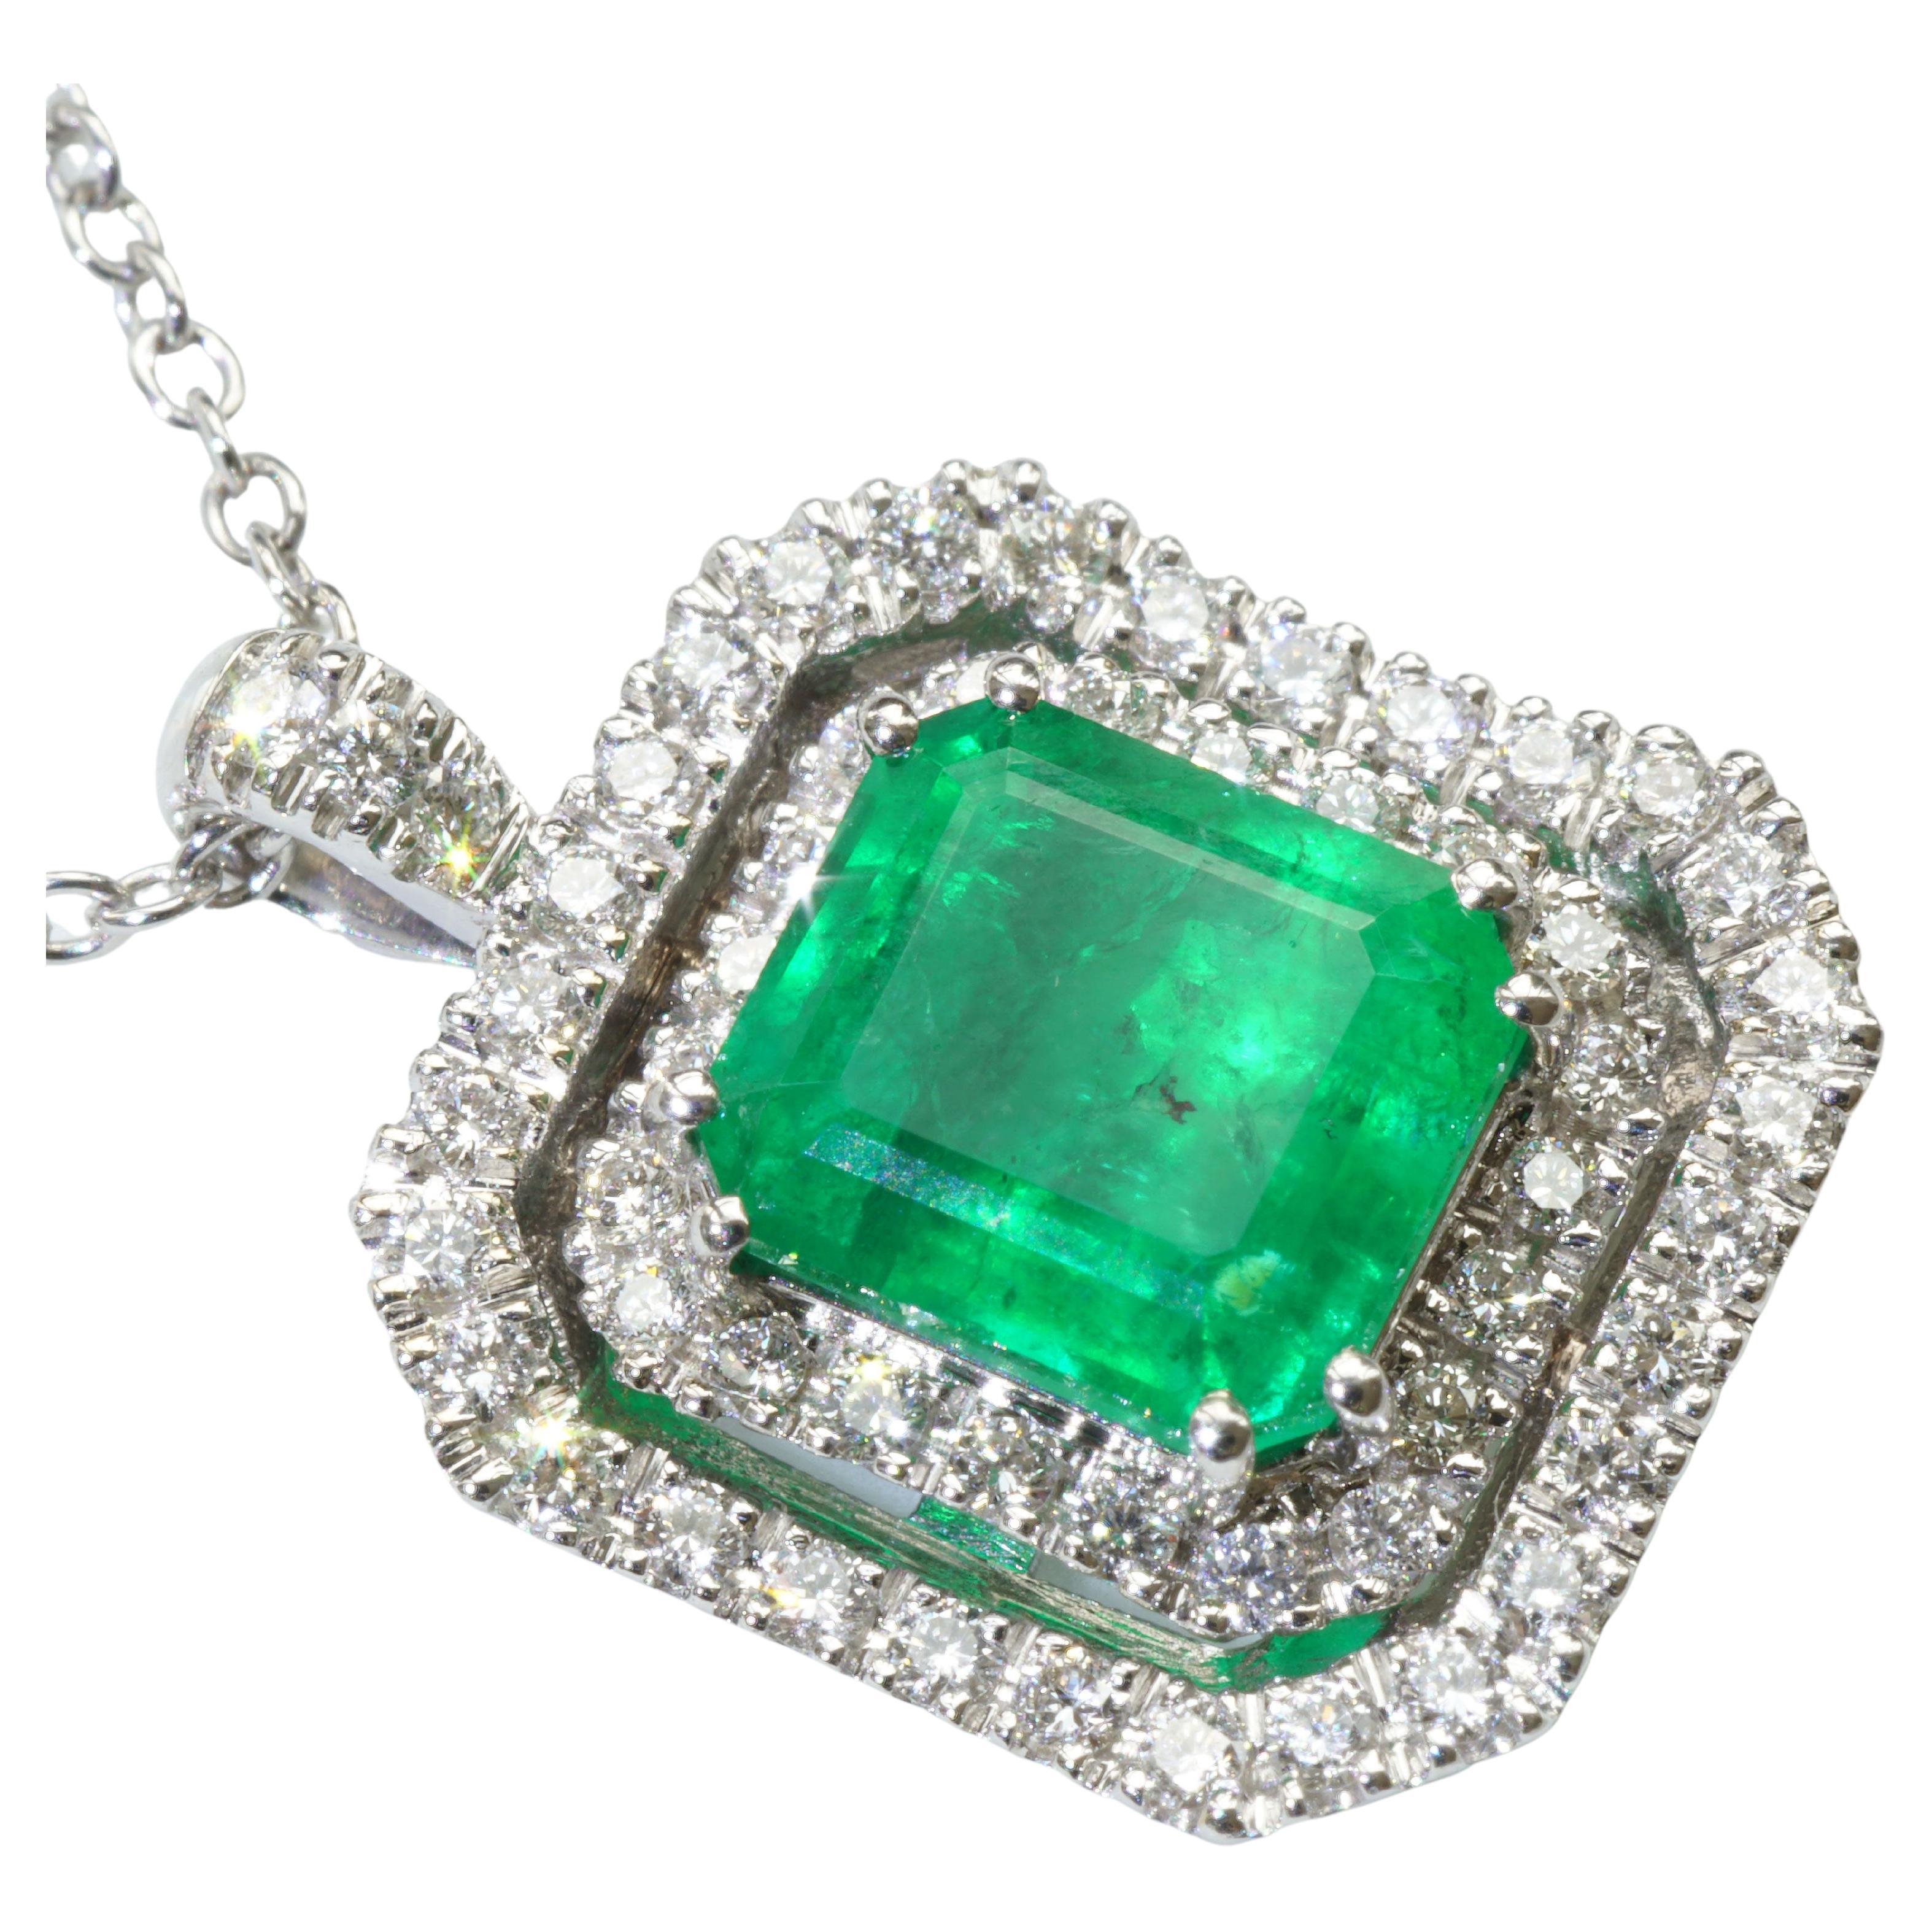 Emerald Diamond Pendant 3 Ct 0.41 Ct White Gold Panjshir Afghanistan Great Color For Sale